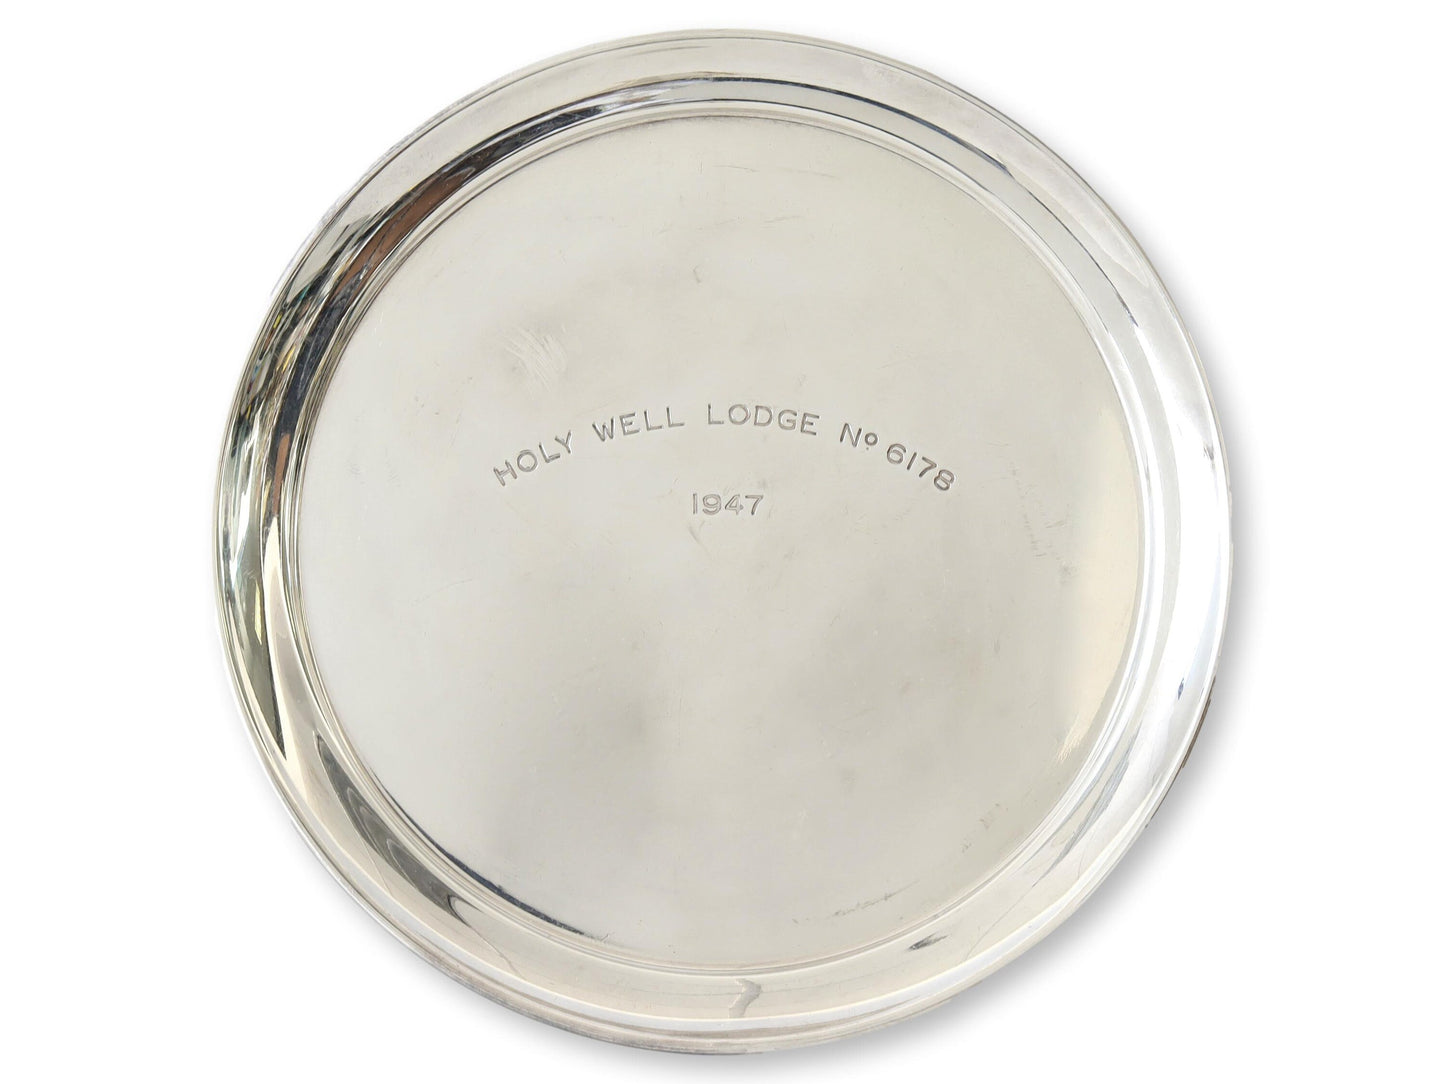 1947 English Lodge Drink Serving Tray